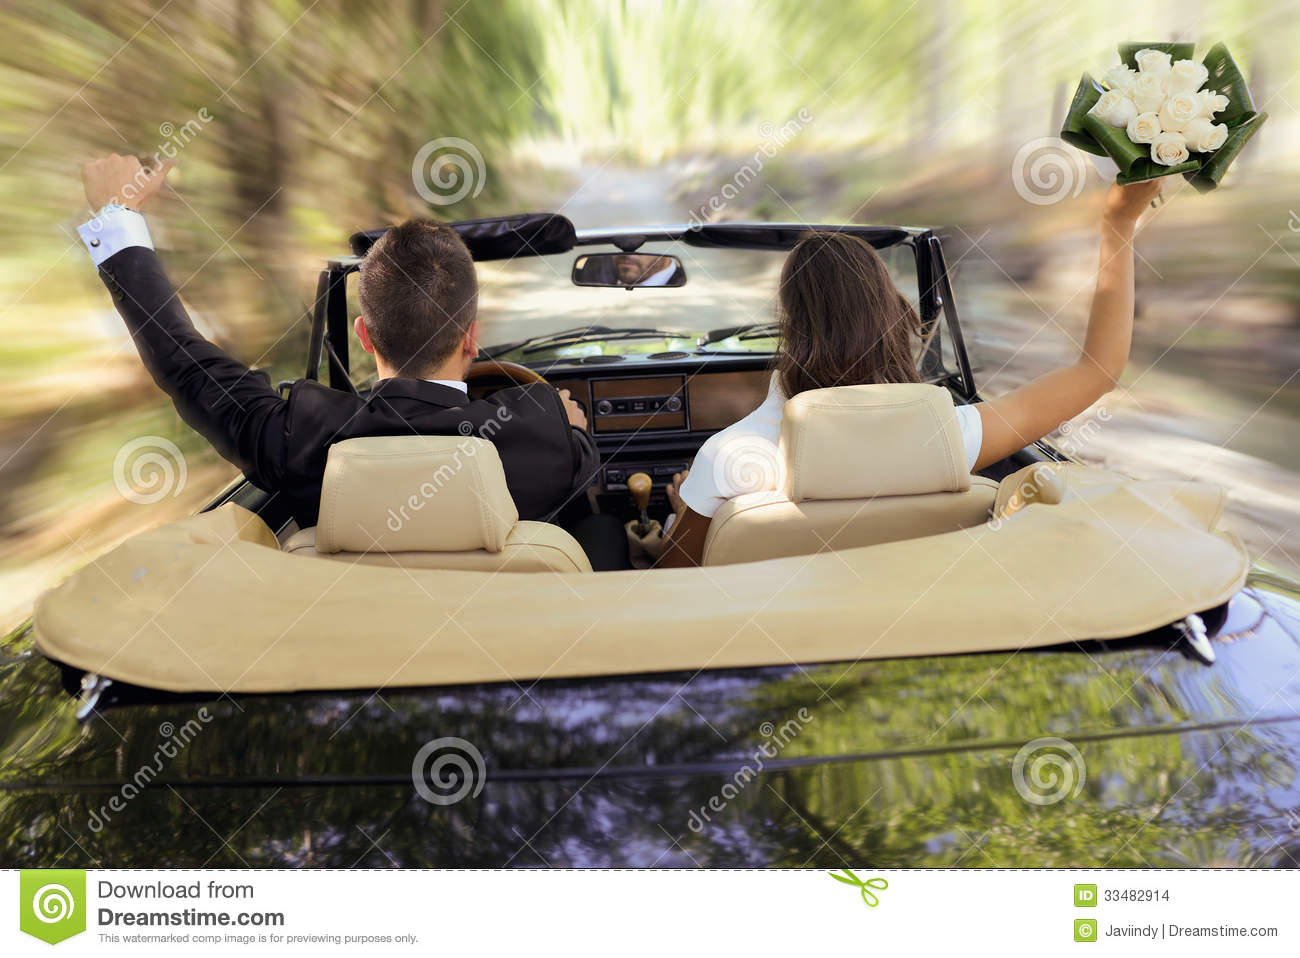 Just Married Couple In An Old Car Stock Images   Image  33482914